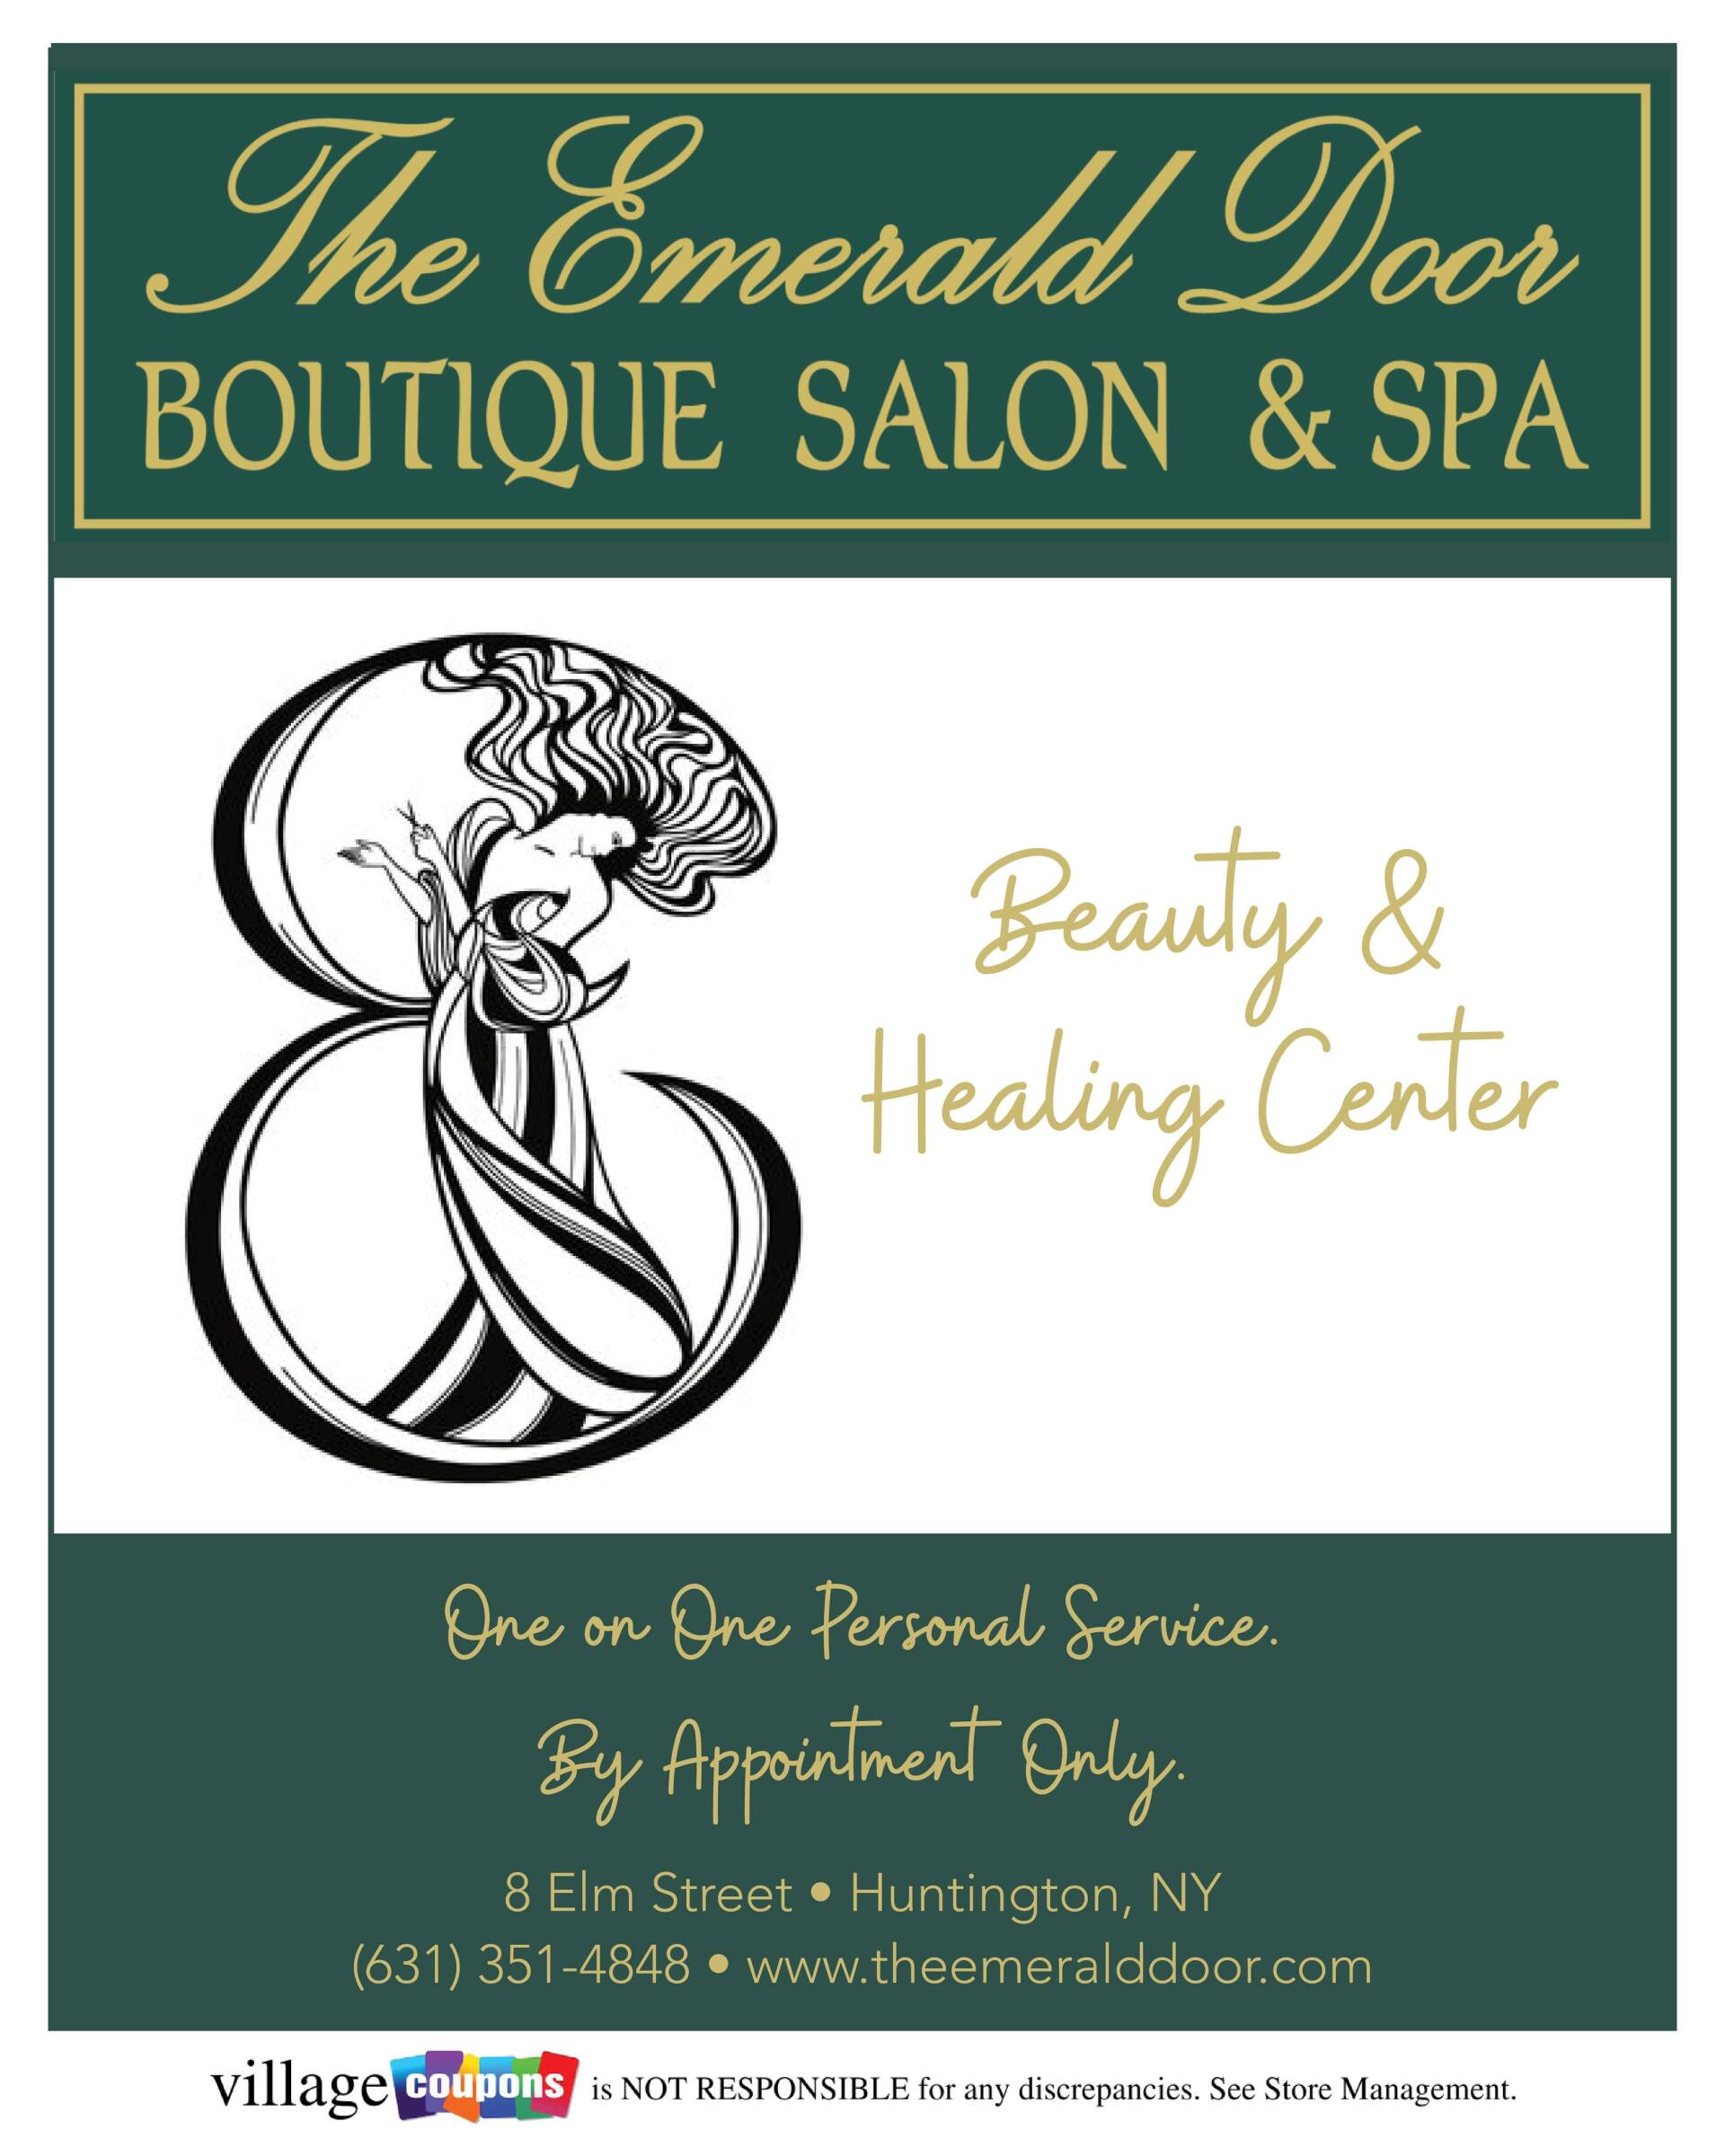 A poster for the emerald door boutique salon & spa